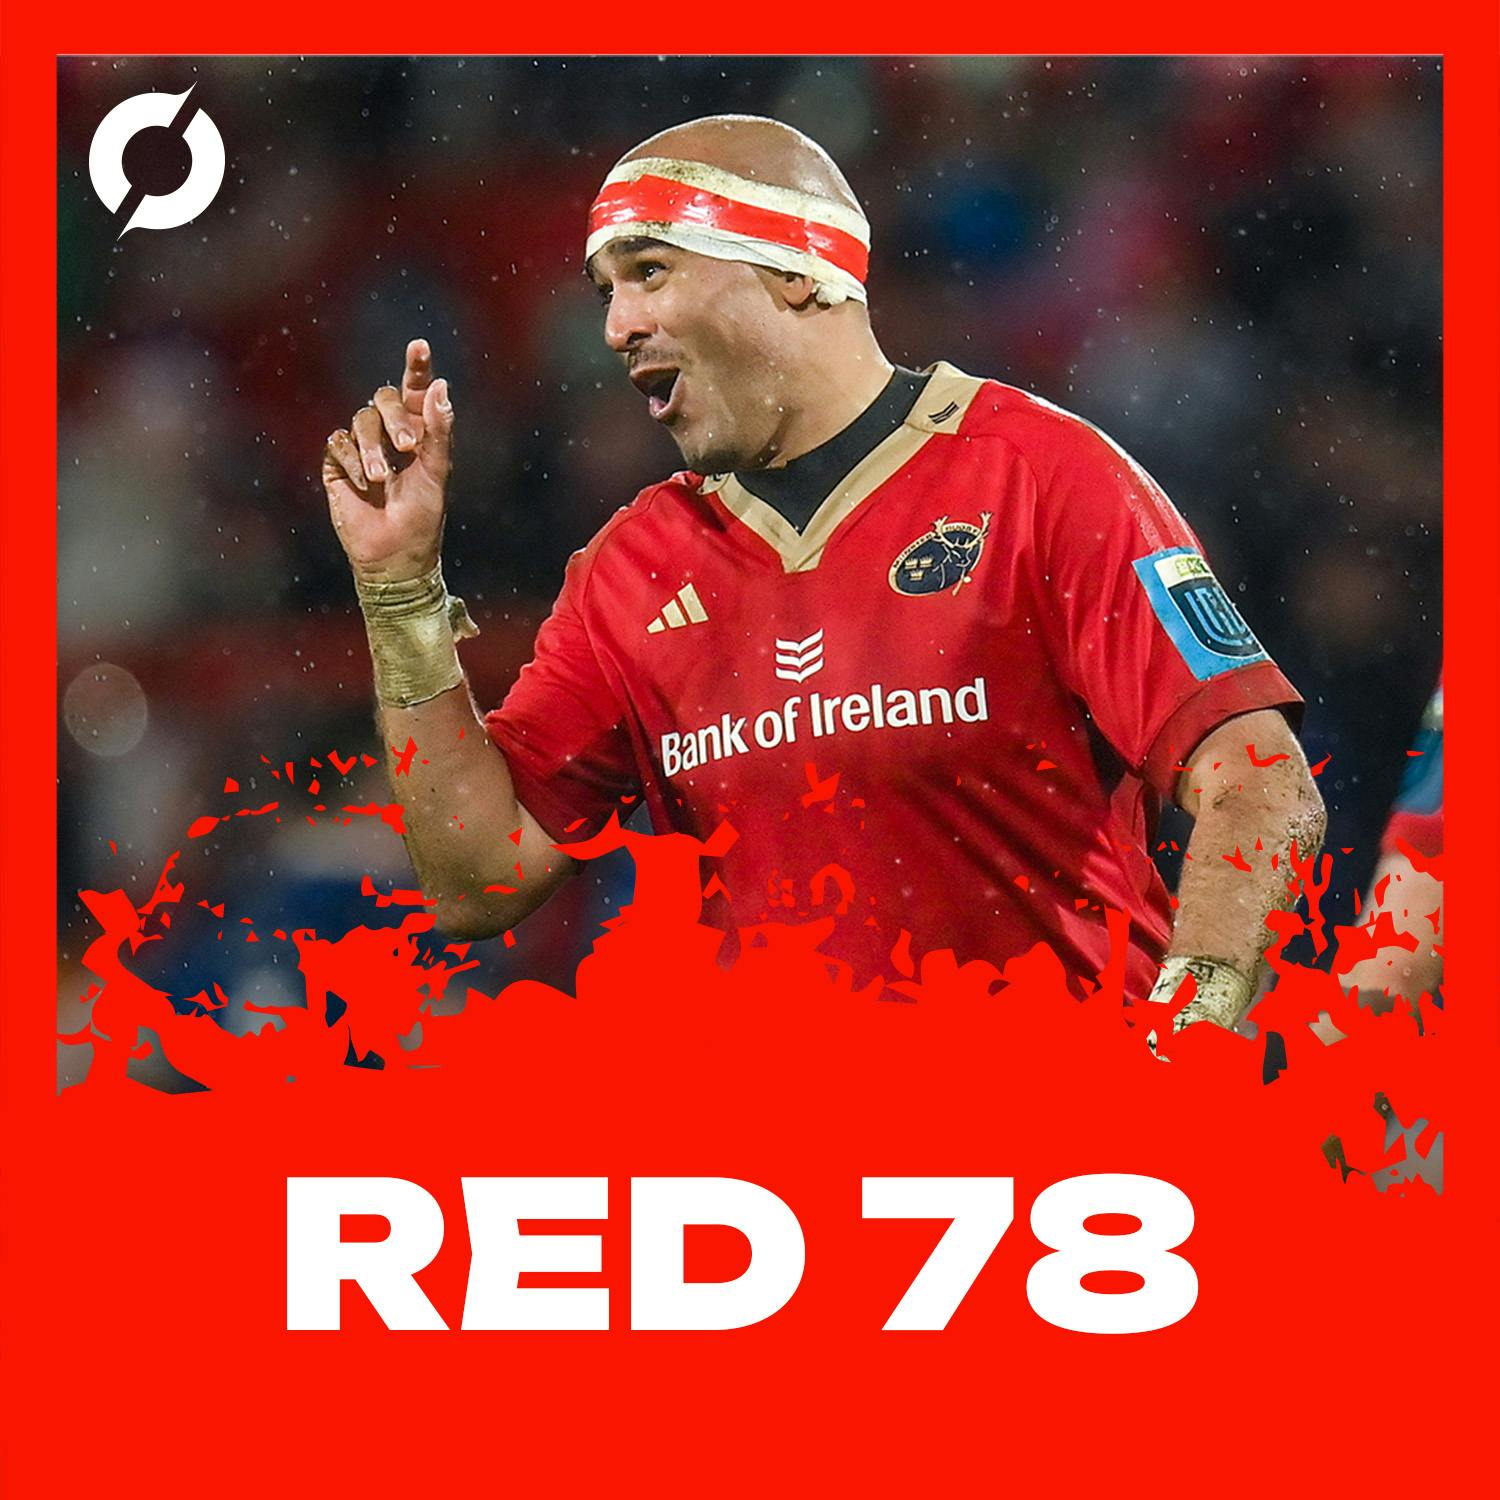 The Red 78 Unlocked: Munster and Leinster battle in the rain, more injuries, and Connacht on New Year’s Day - Ep.82